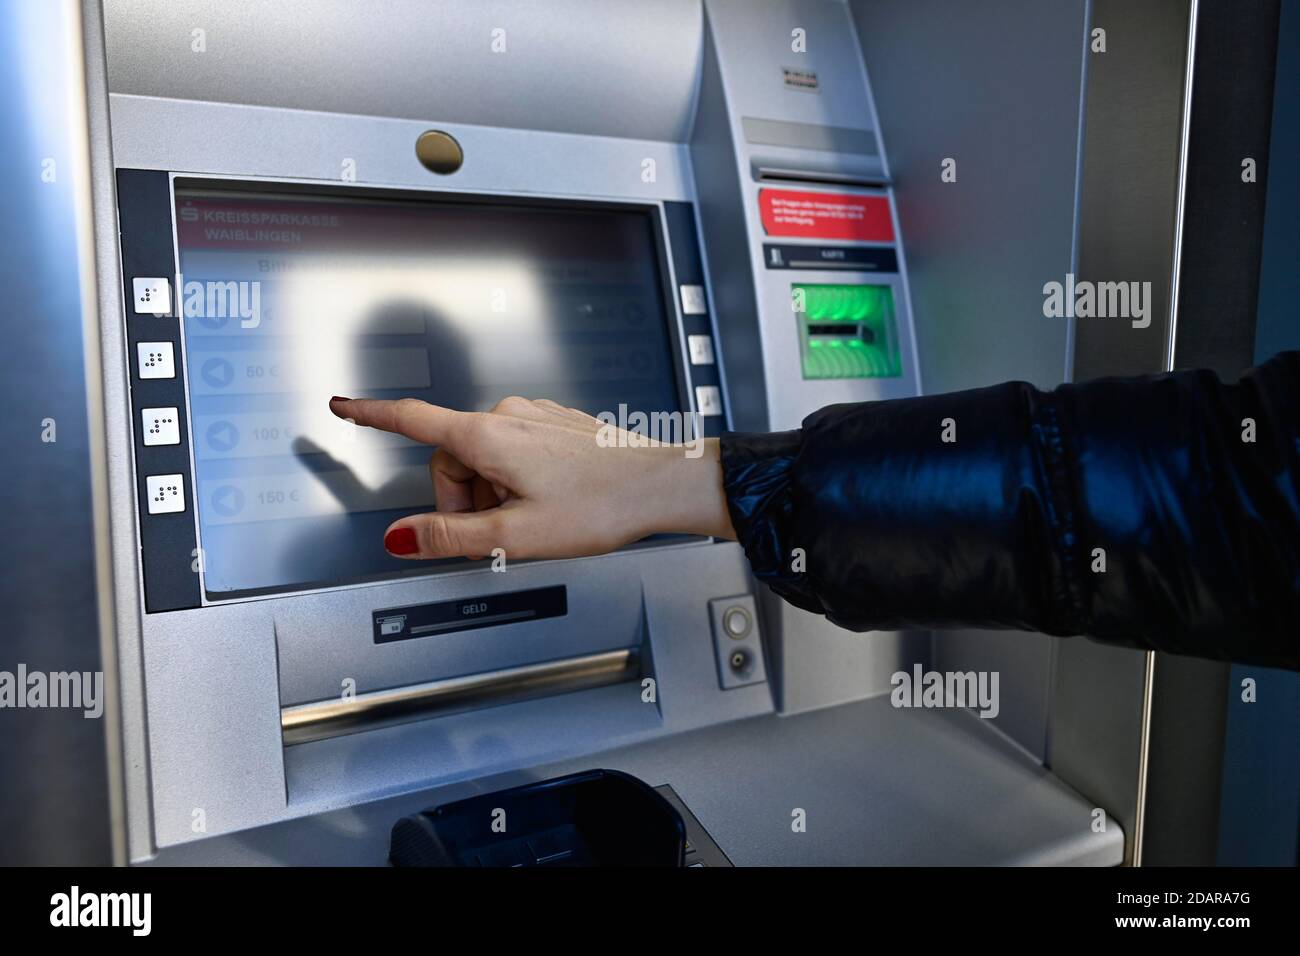 Woman typing on the touch screen of an ATM of a savings bank, Waiblingen, Baden-Wuerttemberg, Germany Stock Photo